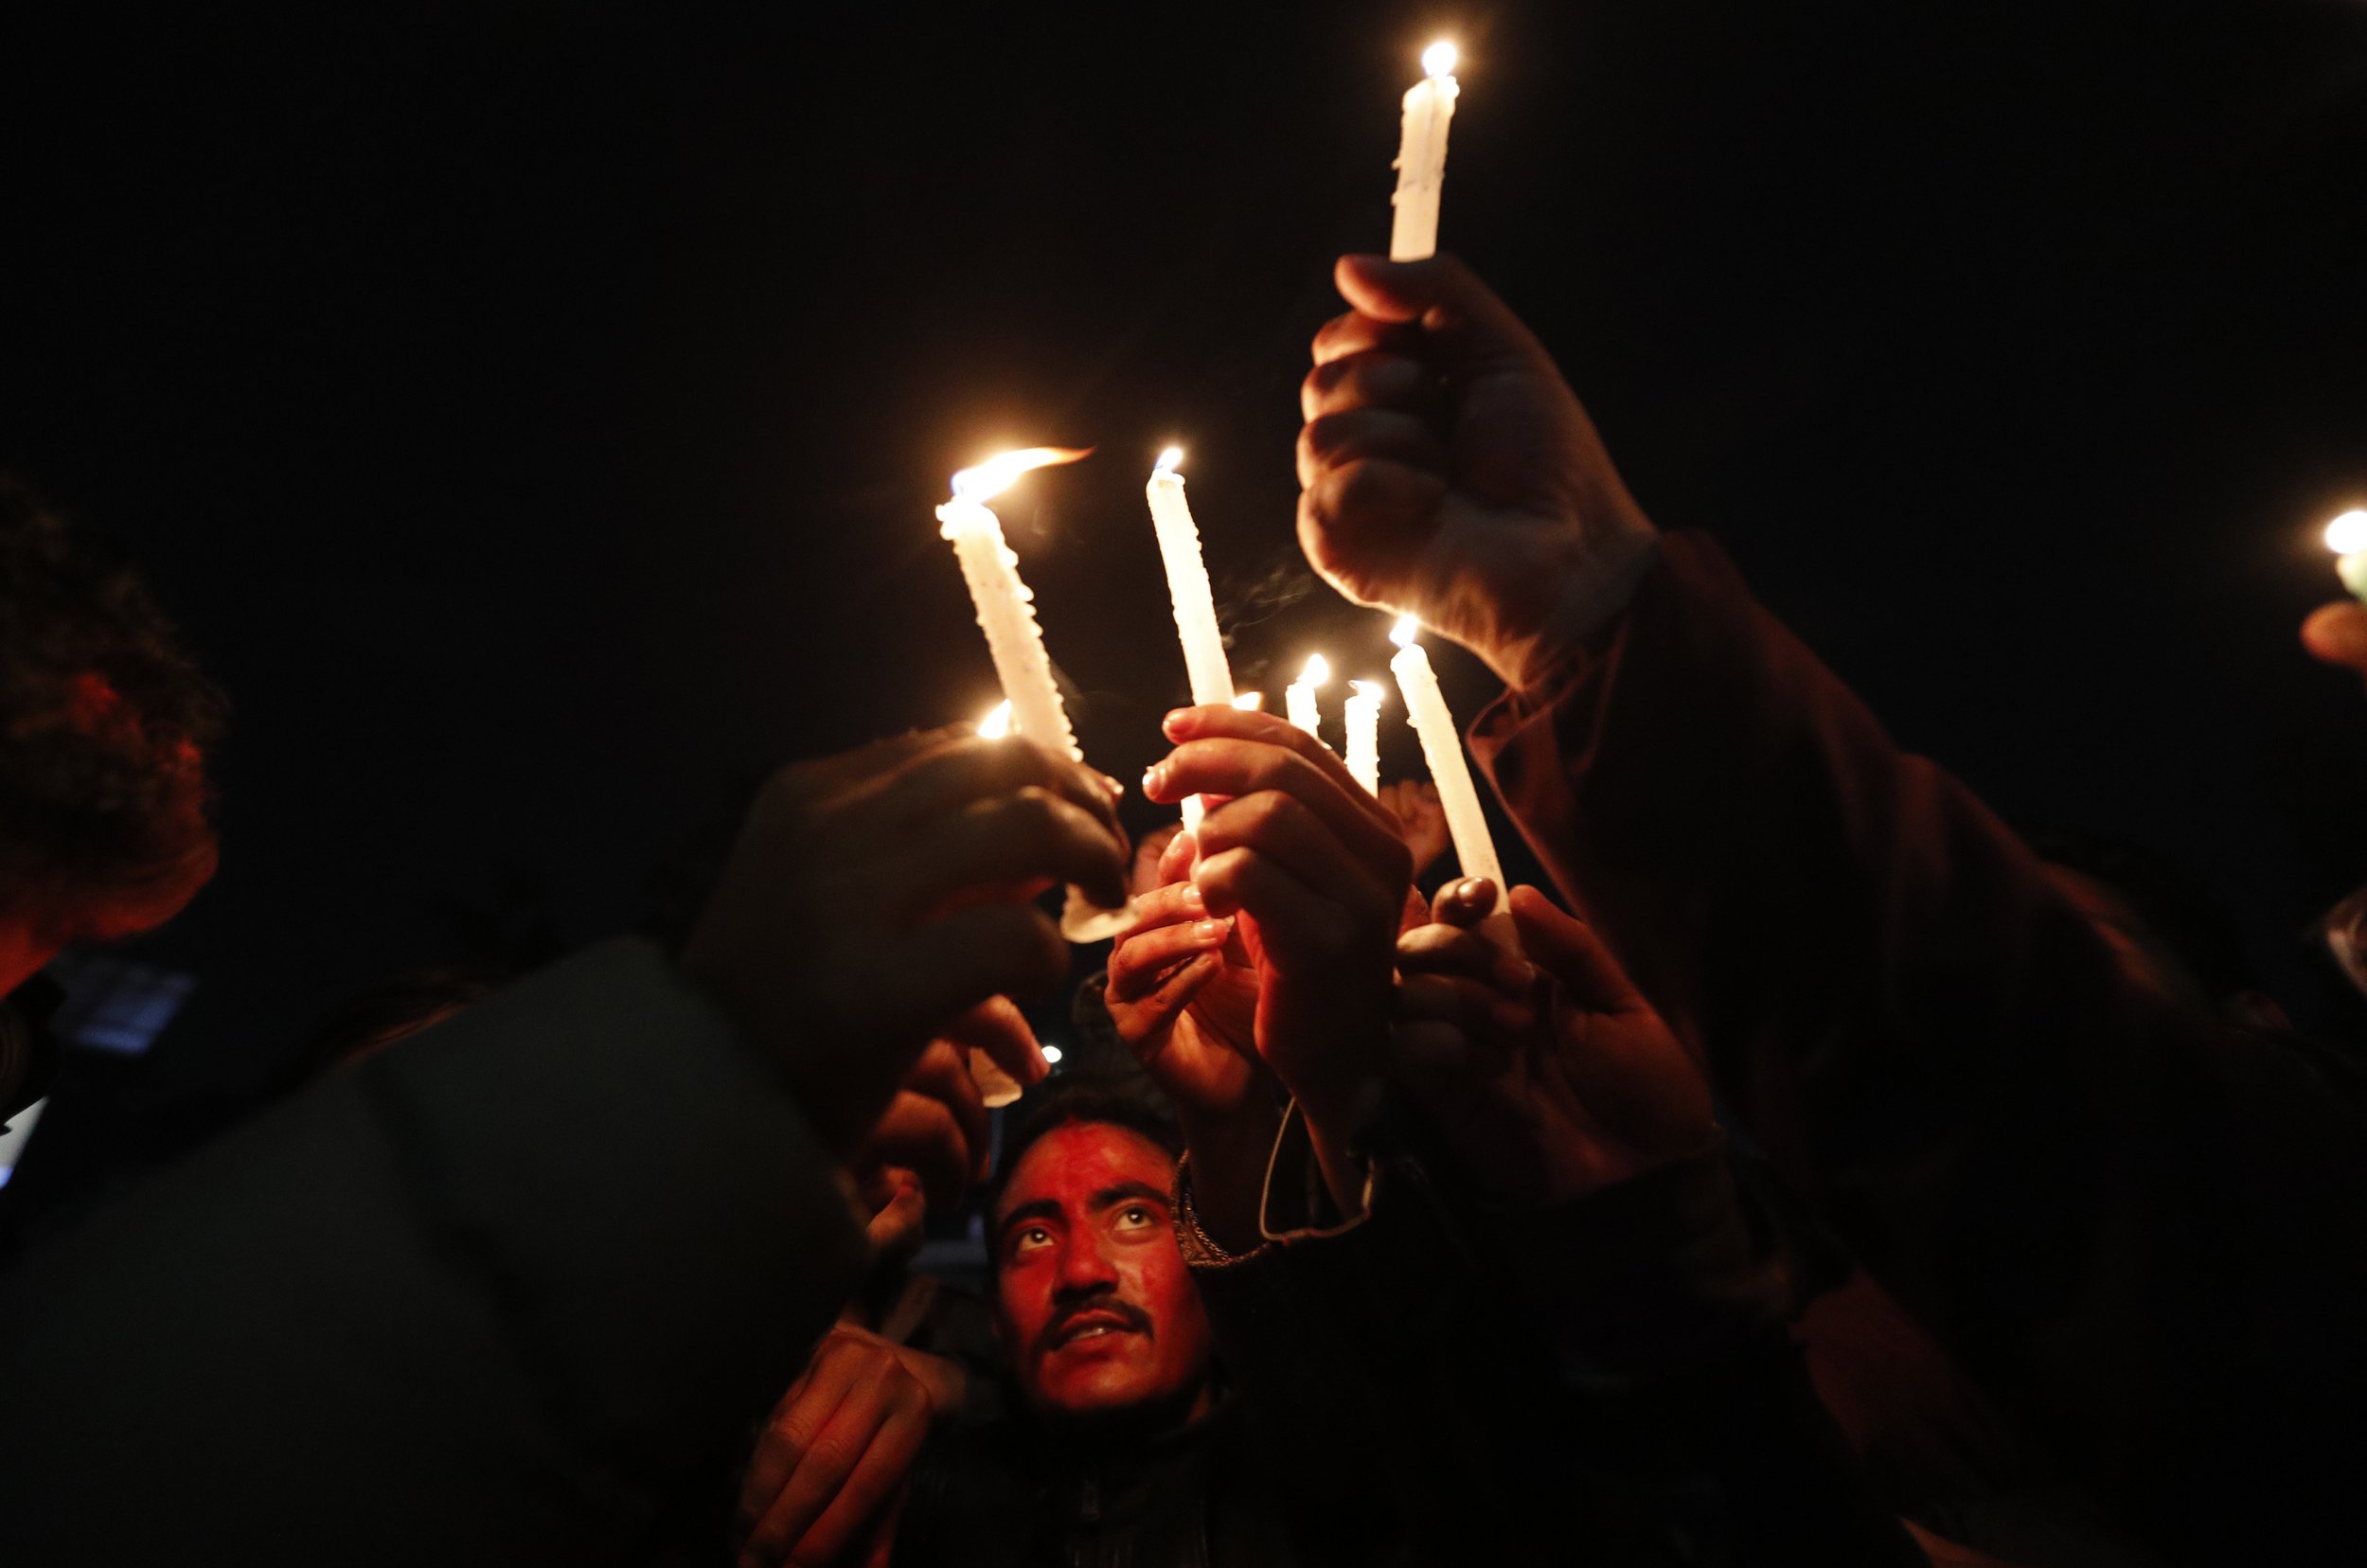  Nepalese supporters of the splinter group in the governing Nepal Communist Party celebrate on Feb. 23, 2021, in Kathmandu after the Supreme Court ordered the reinstatement of Parliament, which had been dissolved by the prime minister. (AP Photo/Nira